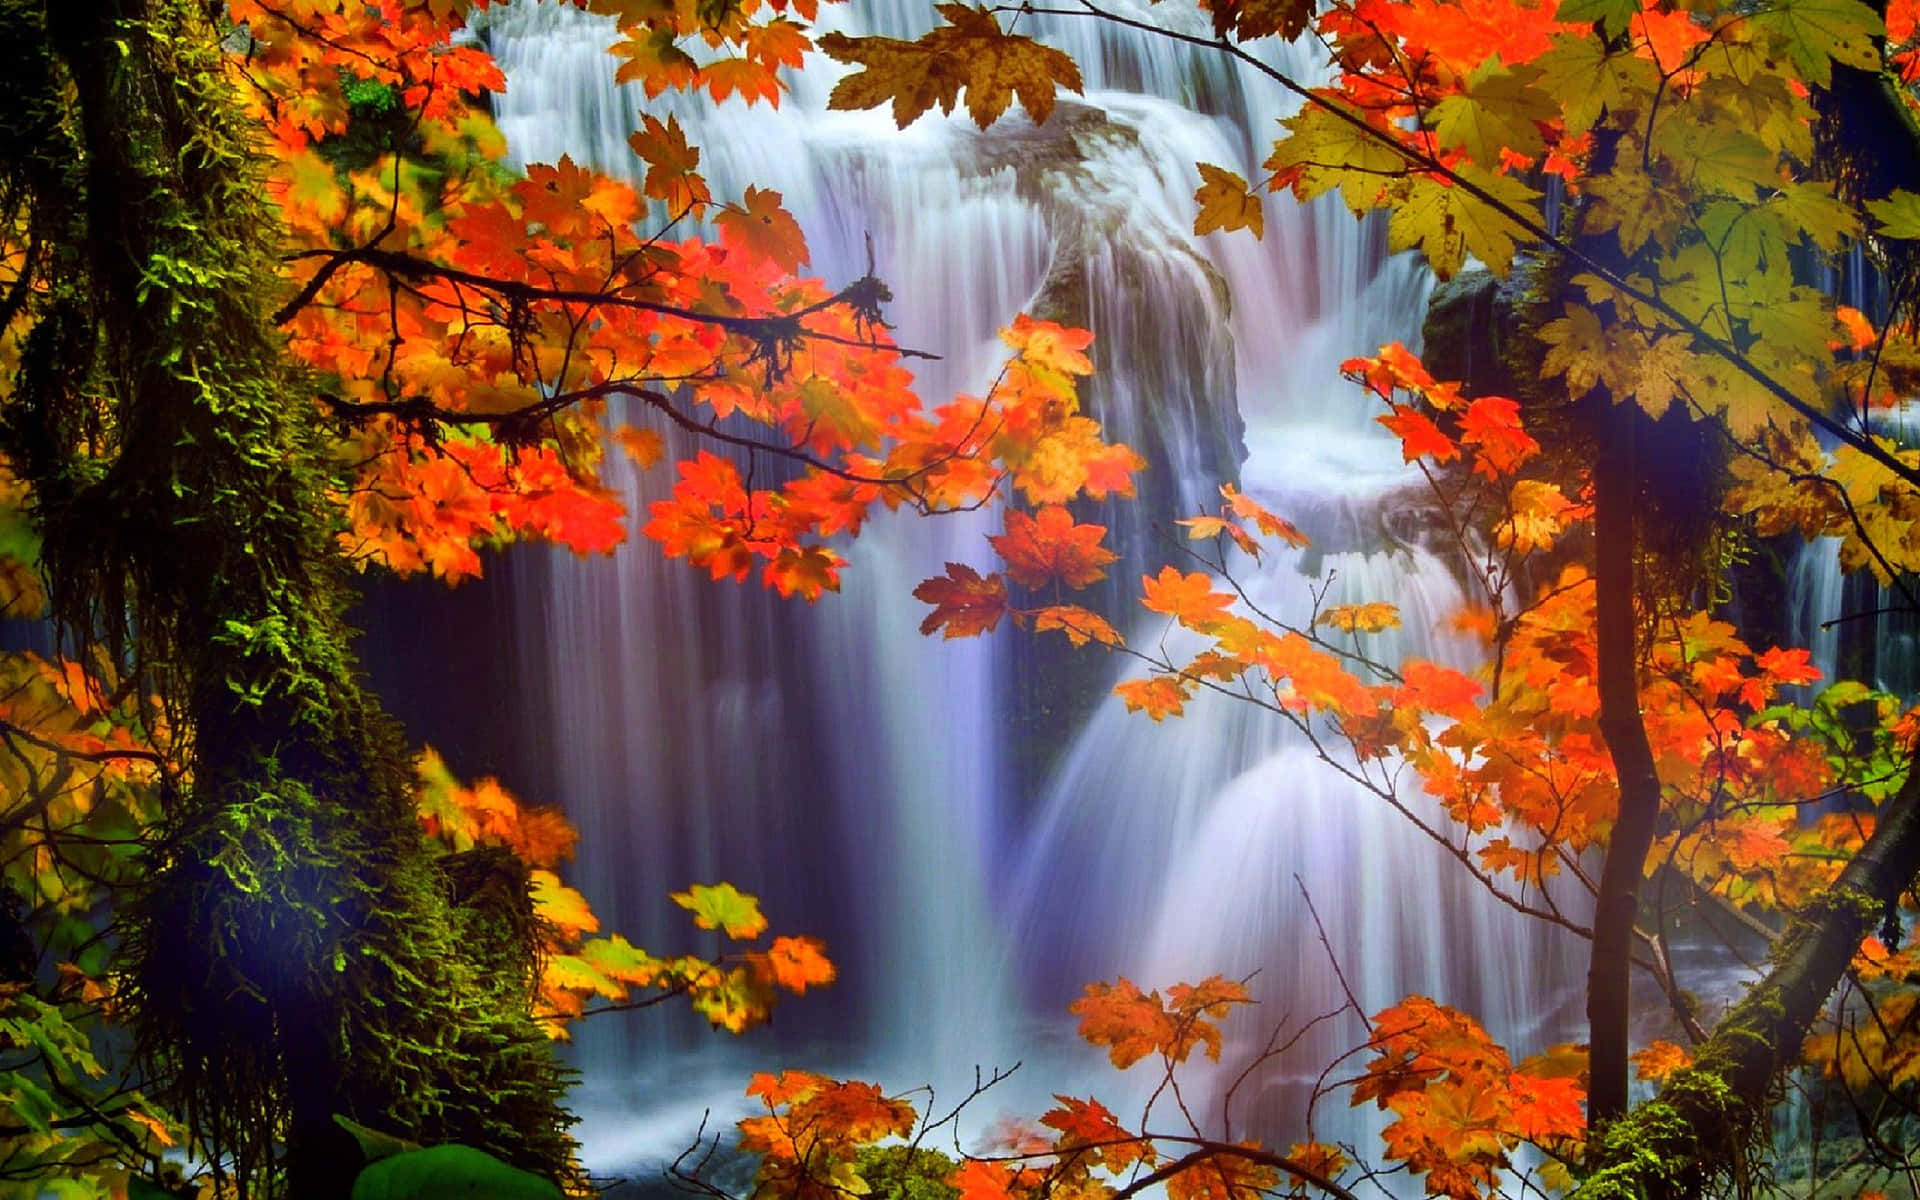 A picturesque view of fall in nature